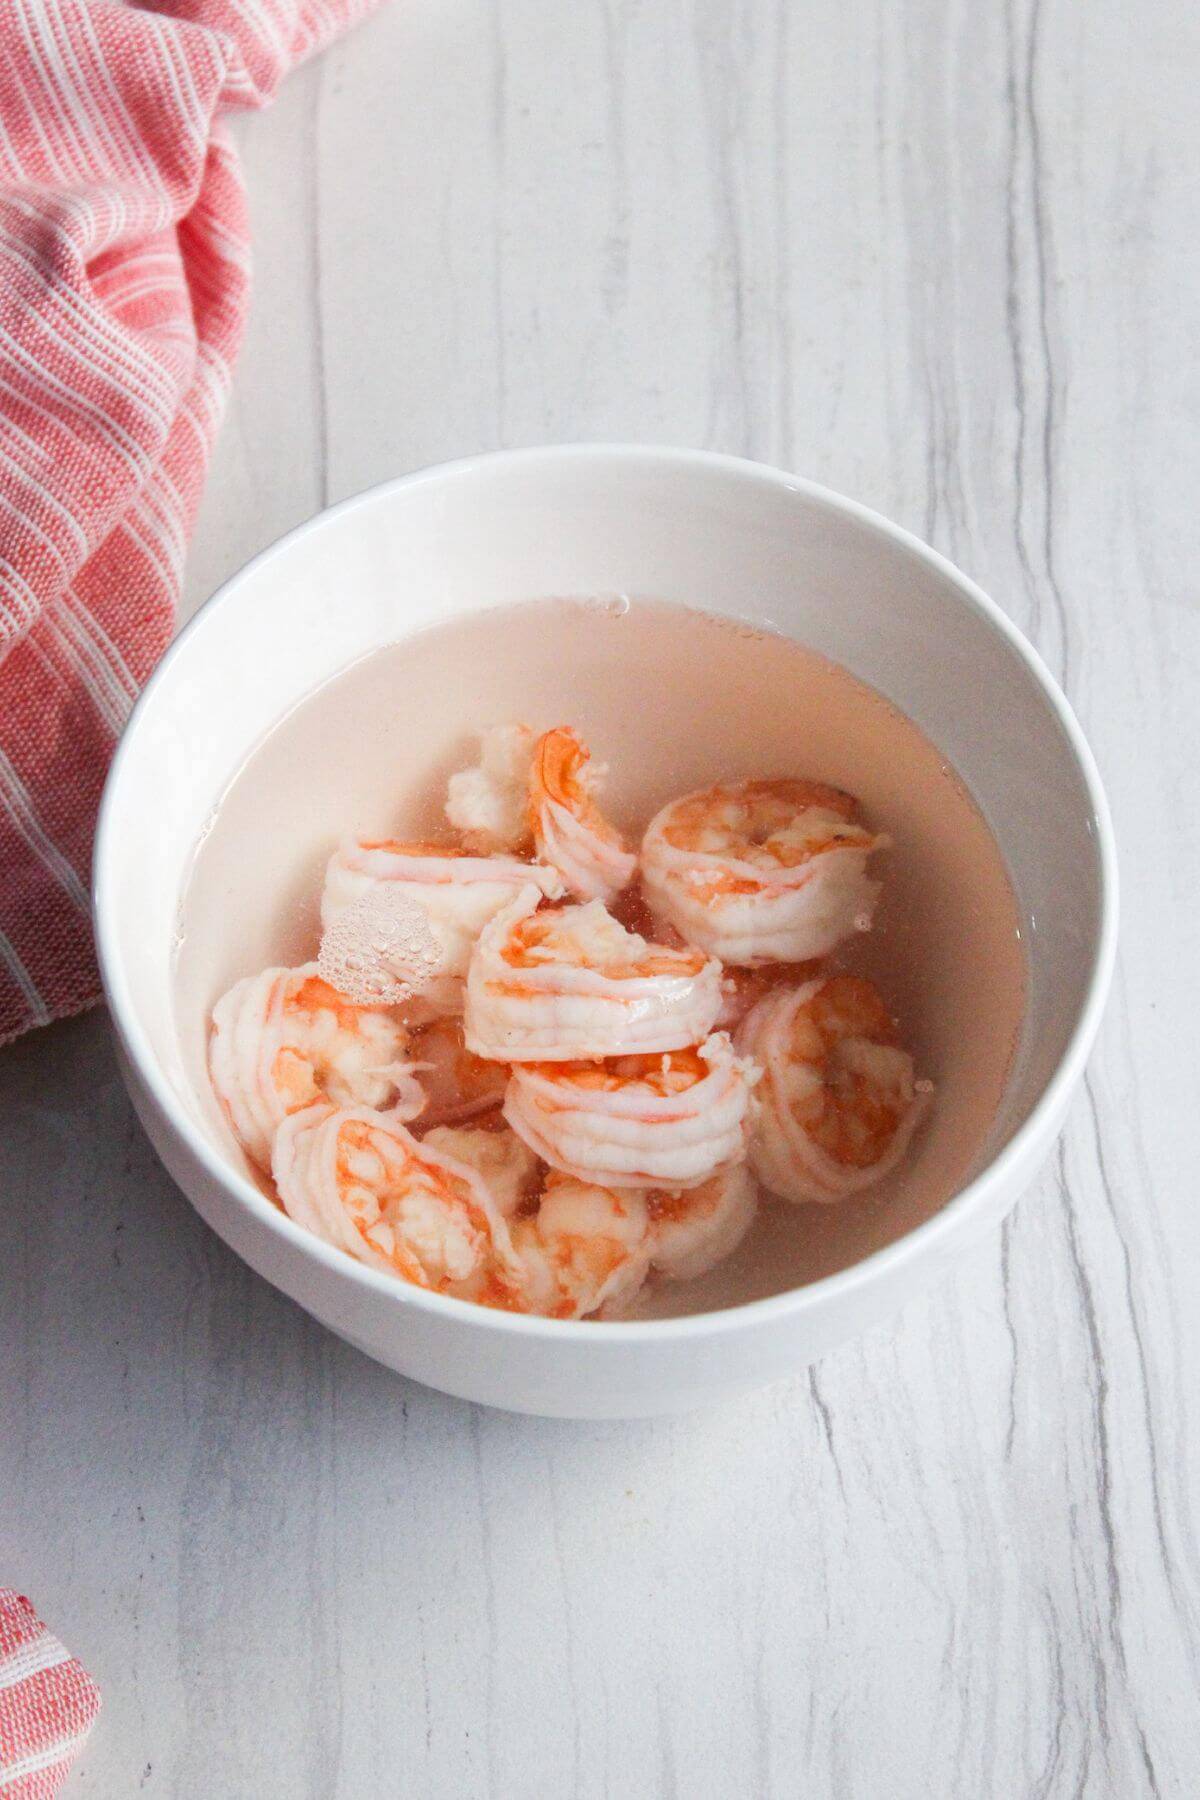 Shrimp in a white bowl with water next to a red towel.